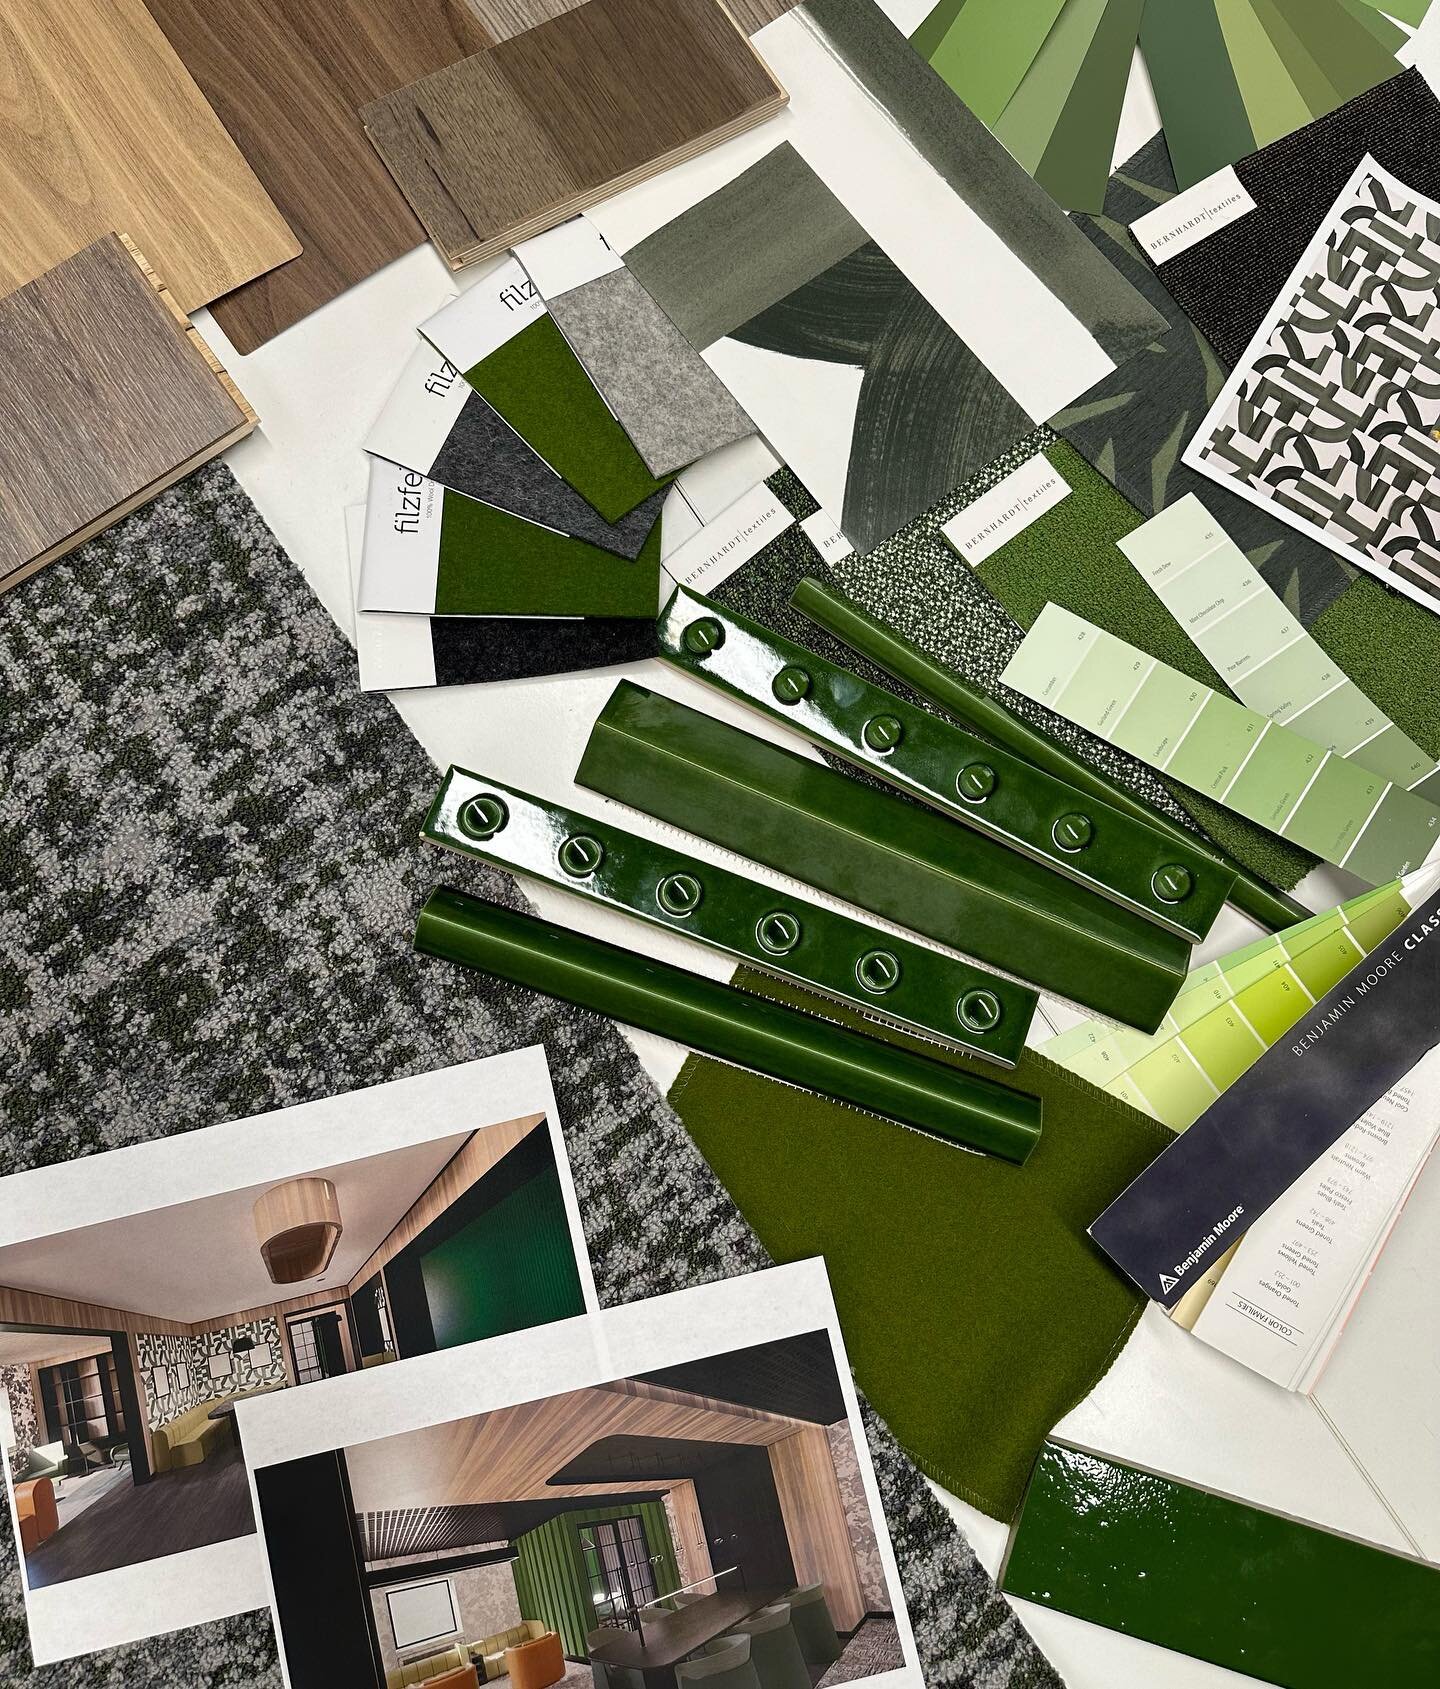 Work in Progress - making final finish selections for an amenity lounge and co-working studio. We&rsquo;re drawn to the stylish green pallet but also appreciate green&rsquo; symbolism of nature, growth, hope and o overall positivity. 

#methodarchite